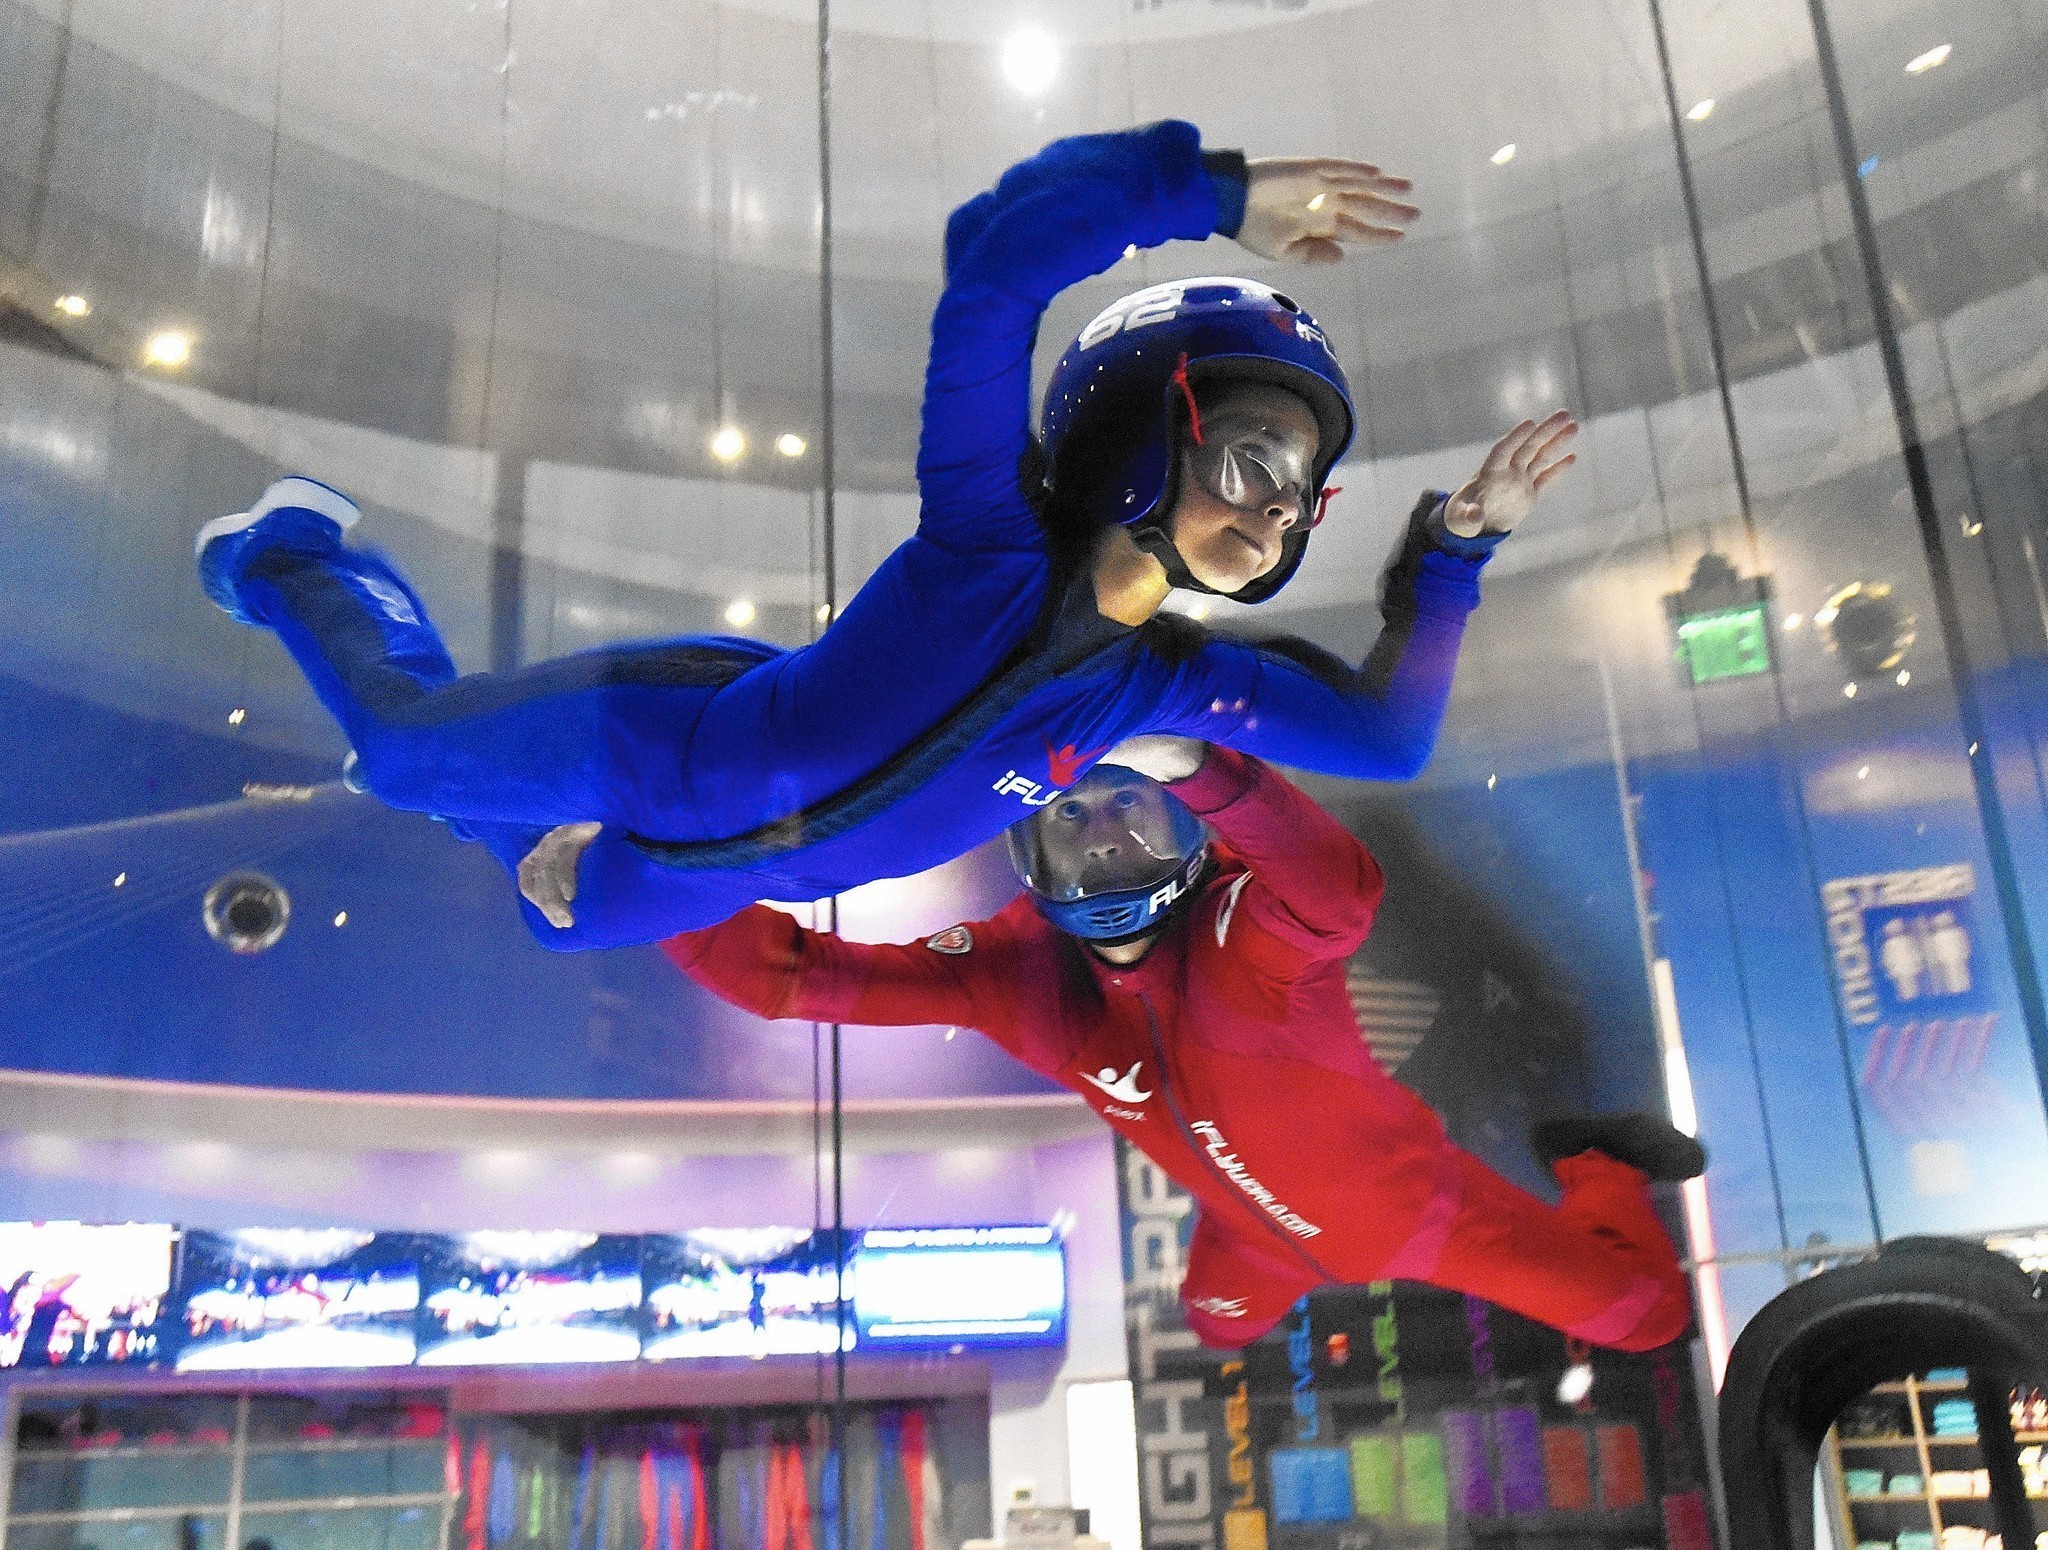 Area indoor skydiving facility lifts off with recent ...
